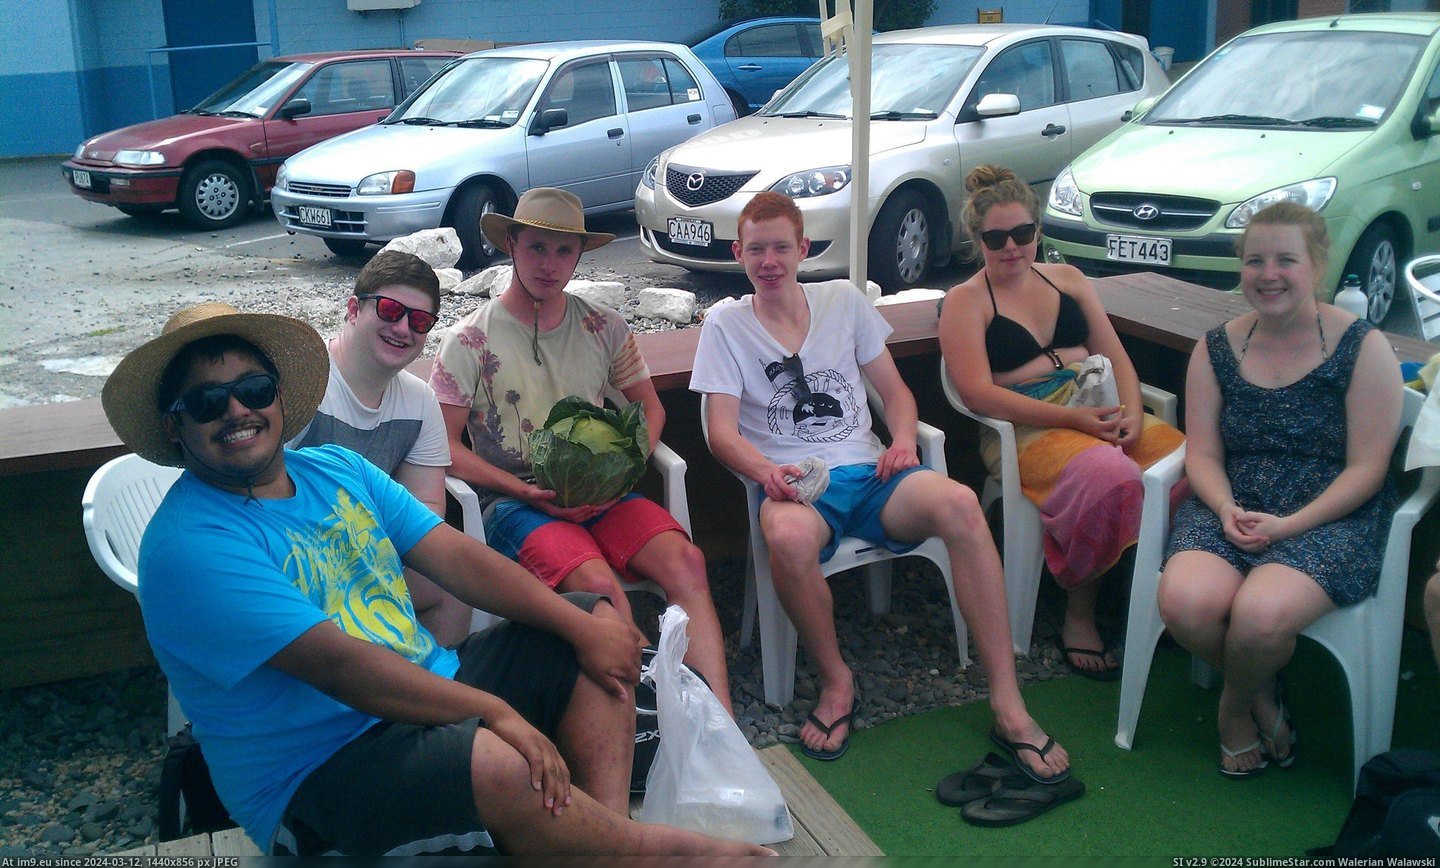 #Beach #Fun #Friends #Mad #Cabbage #Had #Wanted #Bought [Pics] None of my friends wanted to go to the beach with me so I bought a cabbage and had even more fun without them. I also mad Pic. (Obraz z album My r/PICS favs))